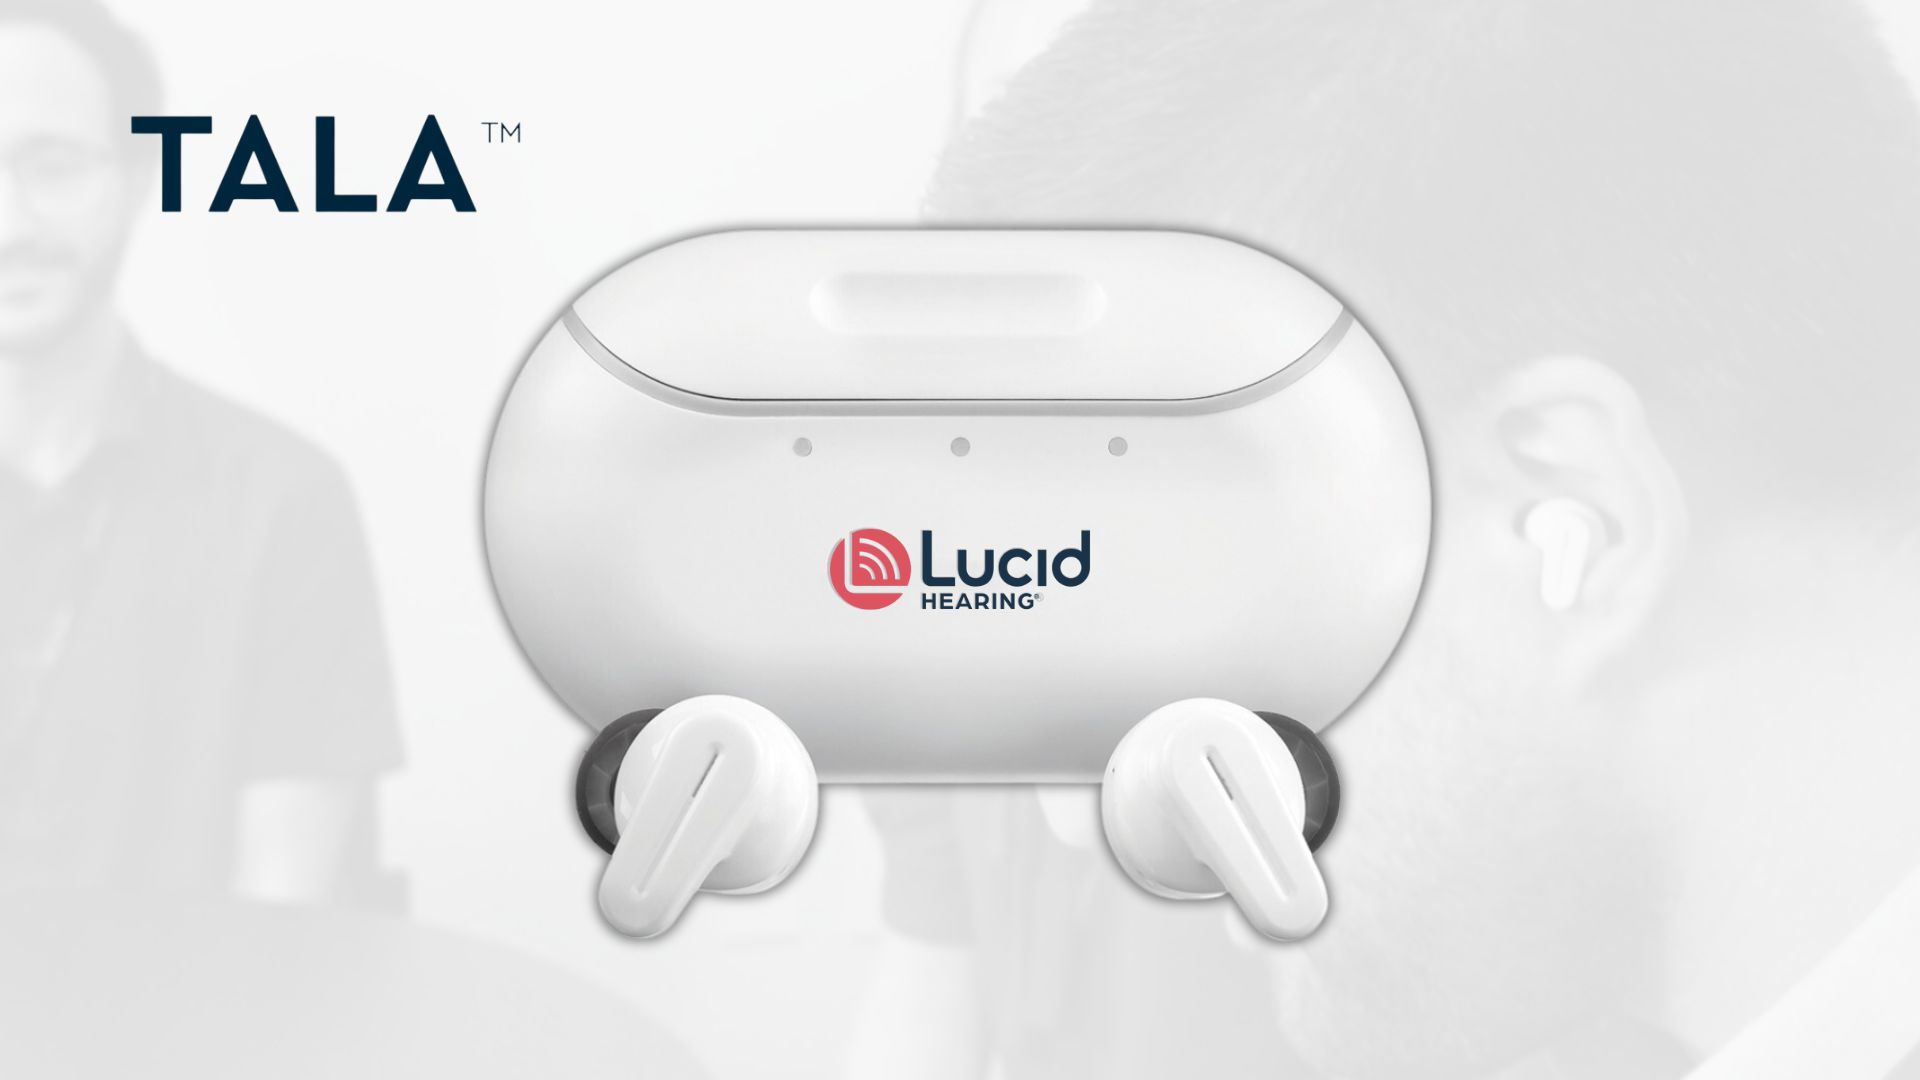 Featured image for “Lucid Hearing Launches Tala™, the Latest Addition to Company’s OTC Hearing Aid Lineup”